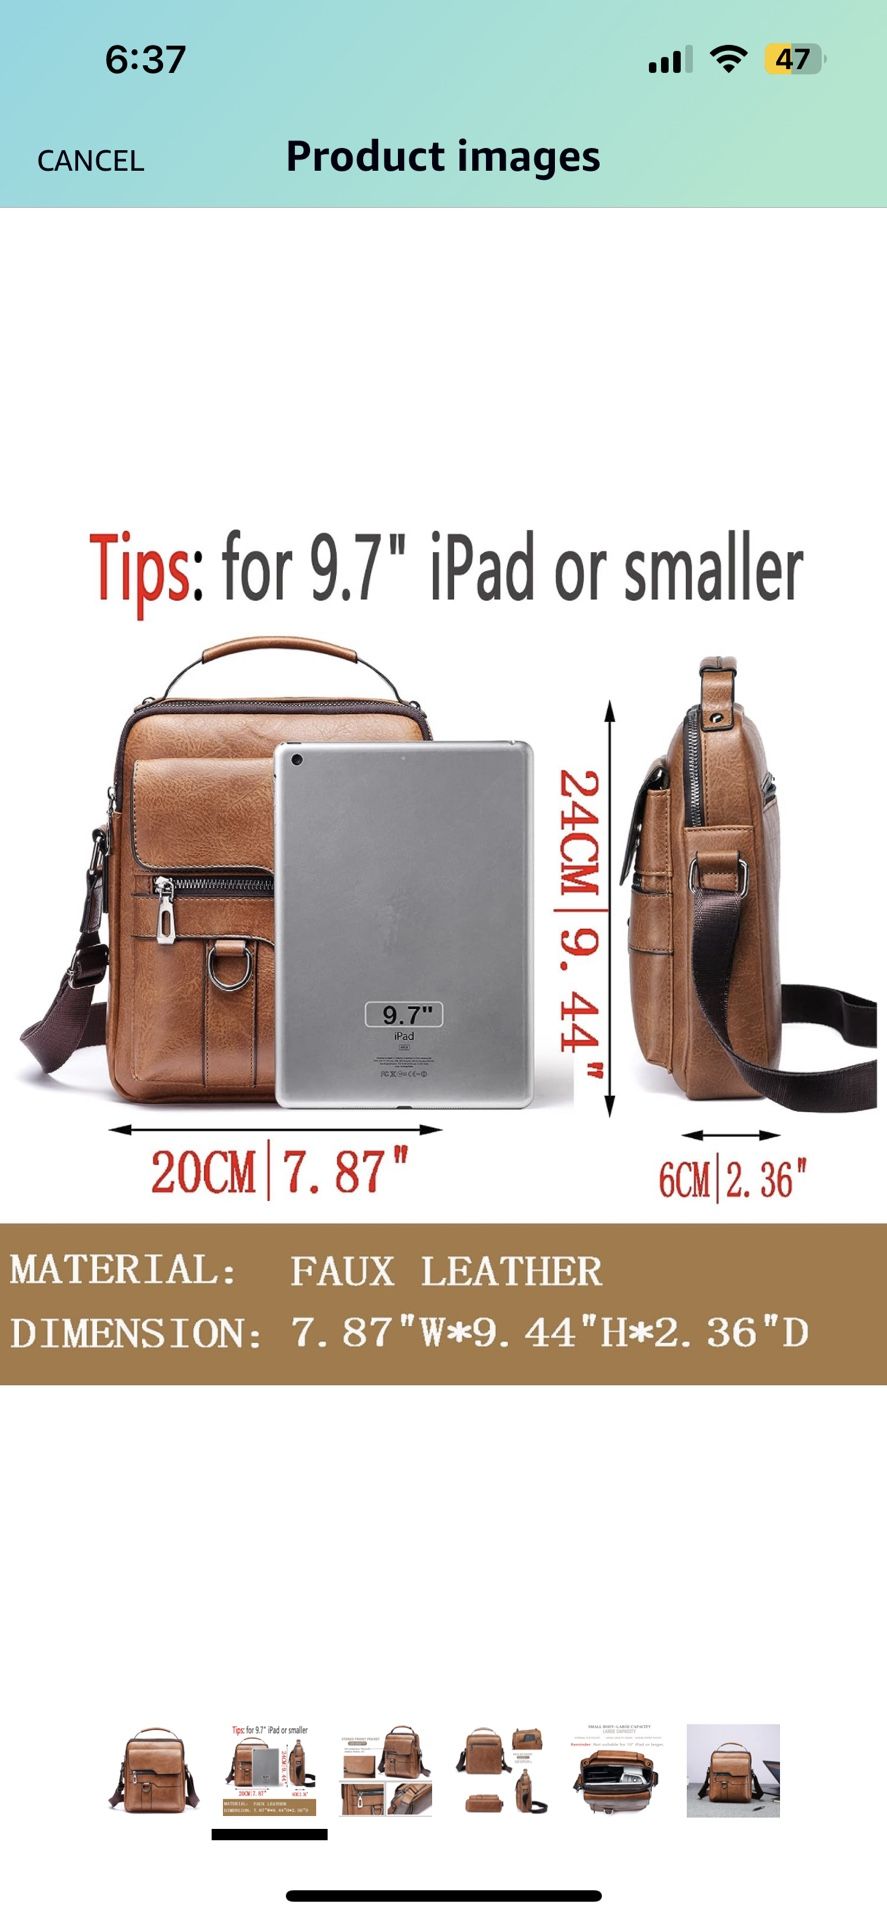 WEIXIER Small Shoulder Bag for Men Leather Crossbody Man Purse Handbag  Satchel Messenger Travel Bags for iPad 9.7 Work Office Business Brown NEW  for Sale in Des Plaines, IL - OfferUp